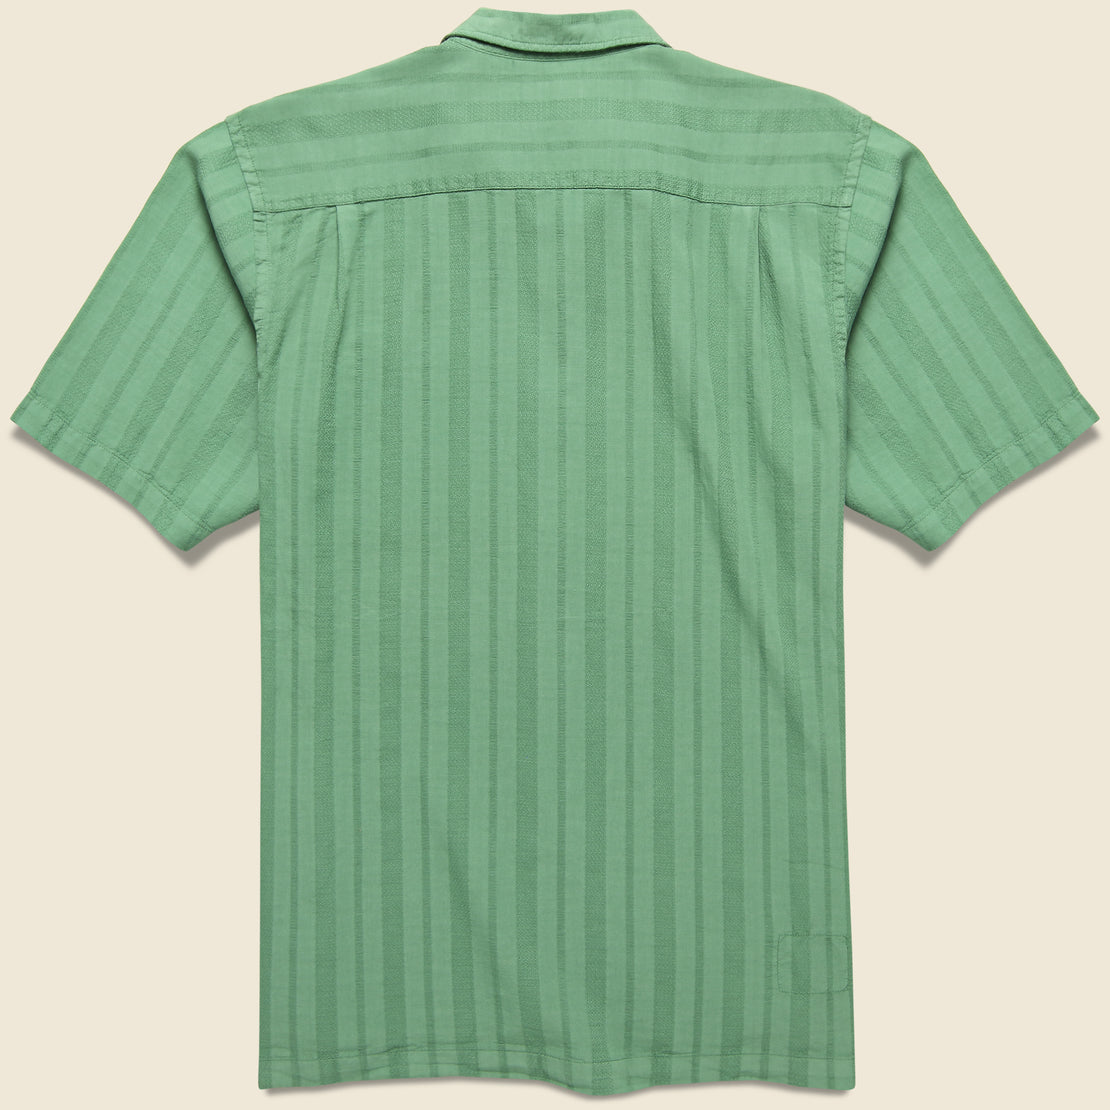 Flag Self Stripe Camp Shirt - Green - Universal Works - STAG Provisions - Tops - S/S Woven - Solid